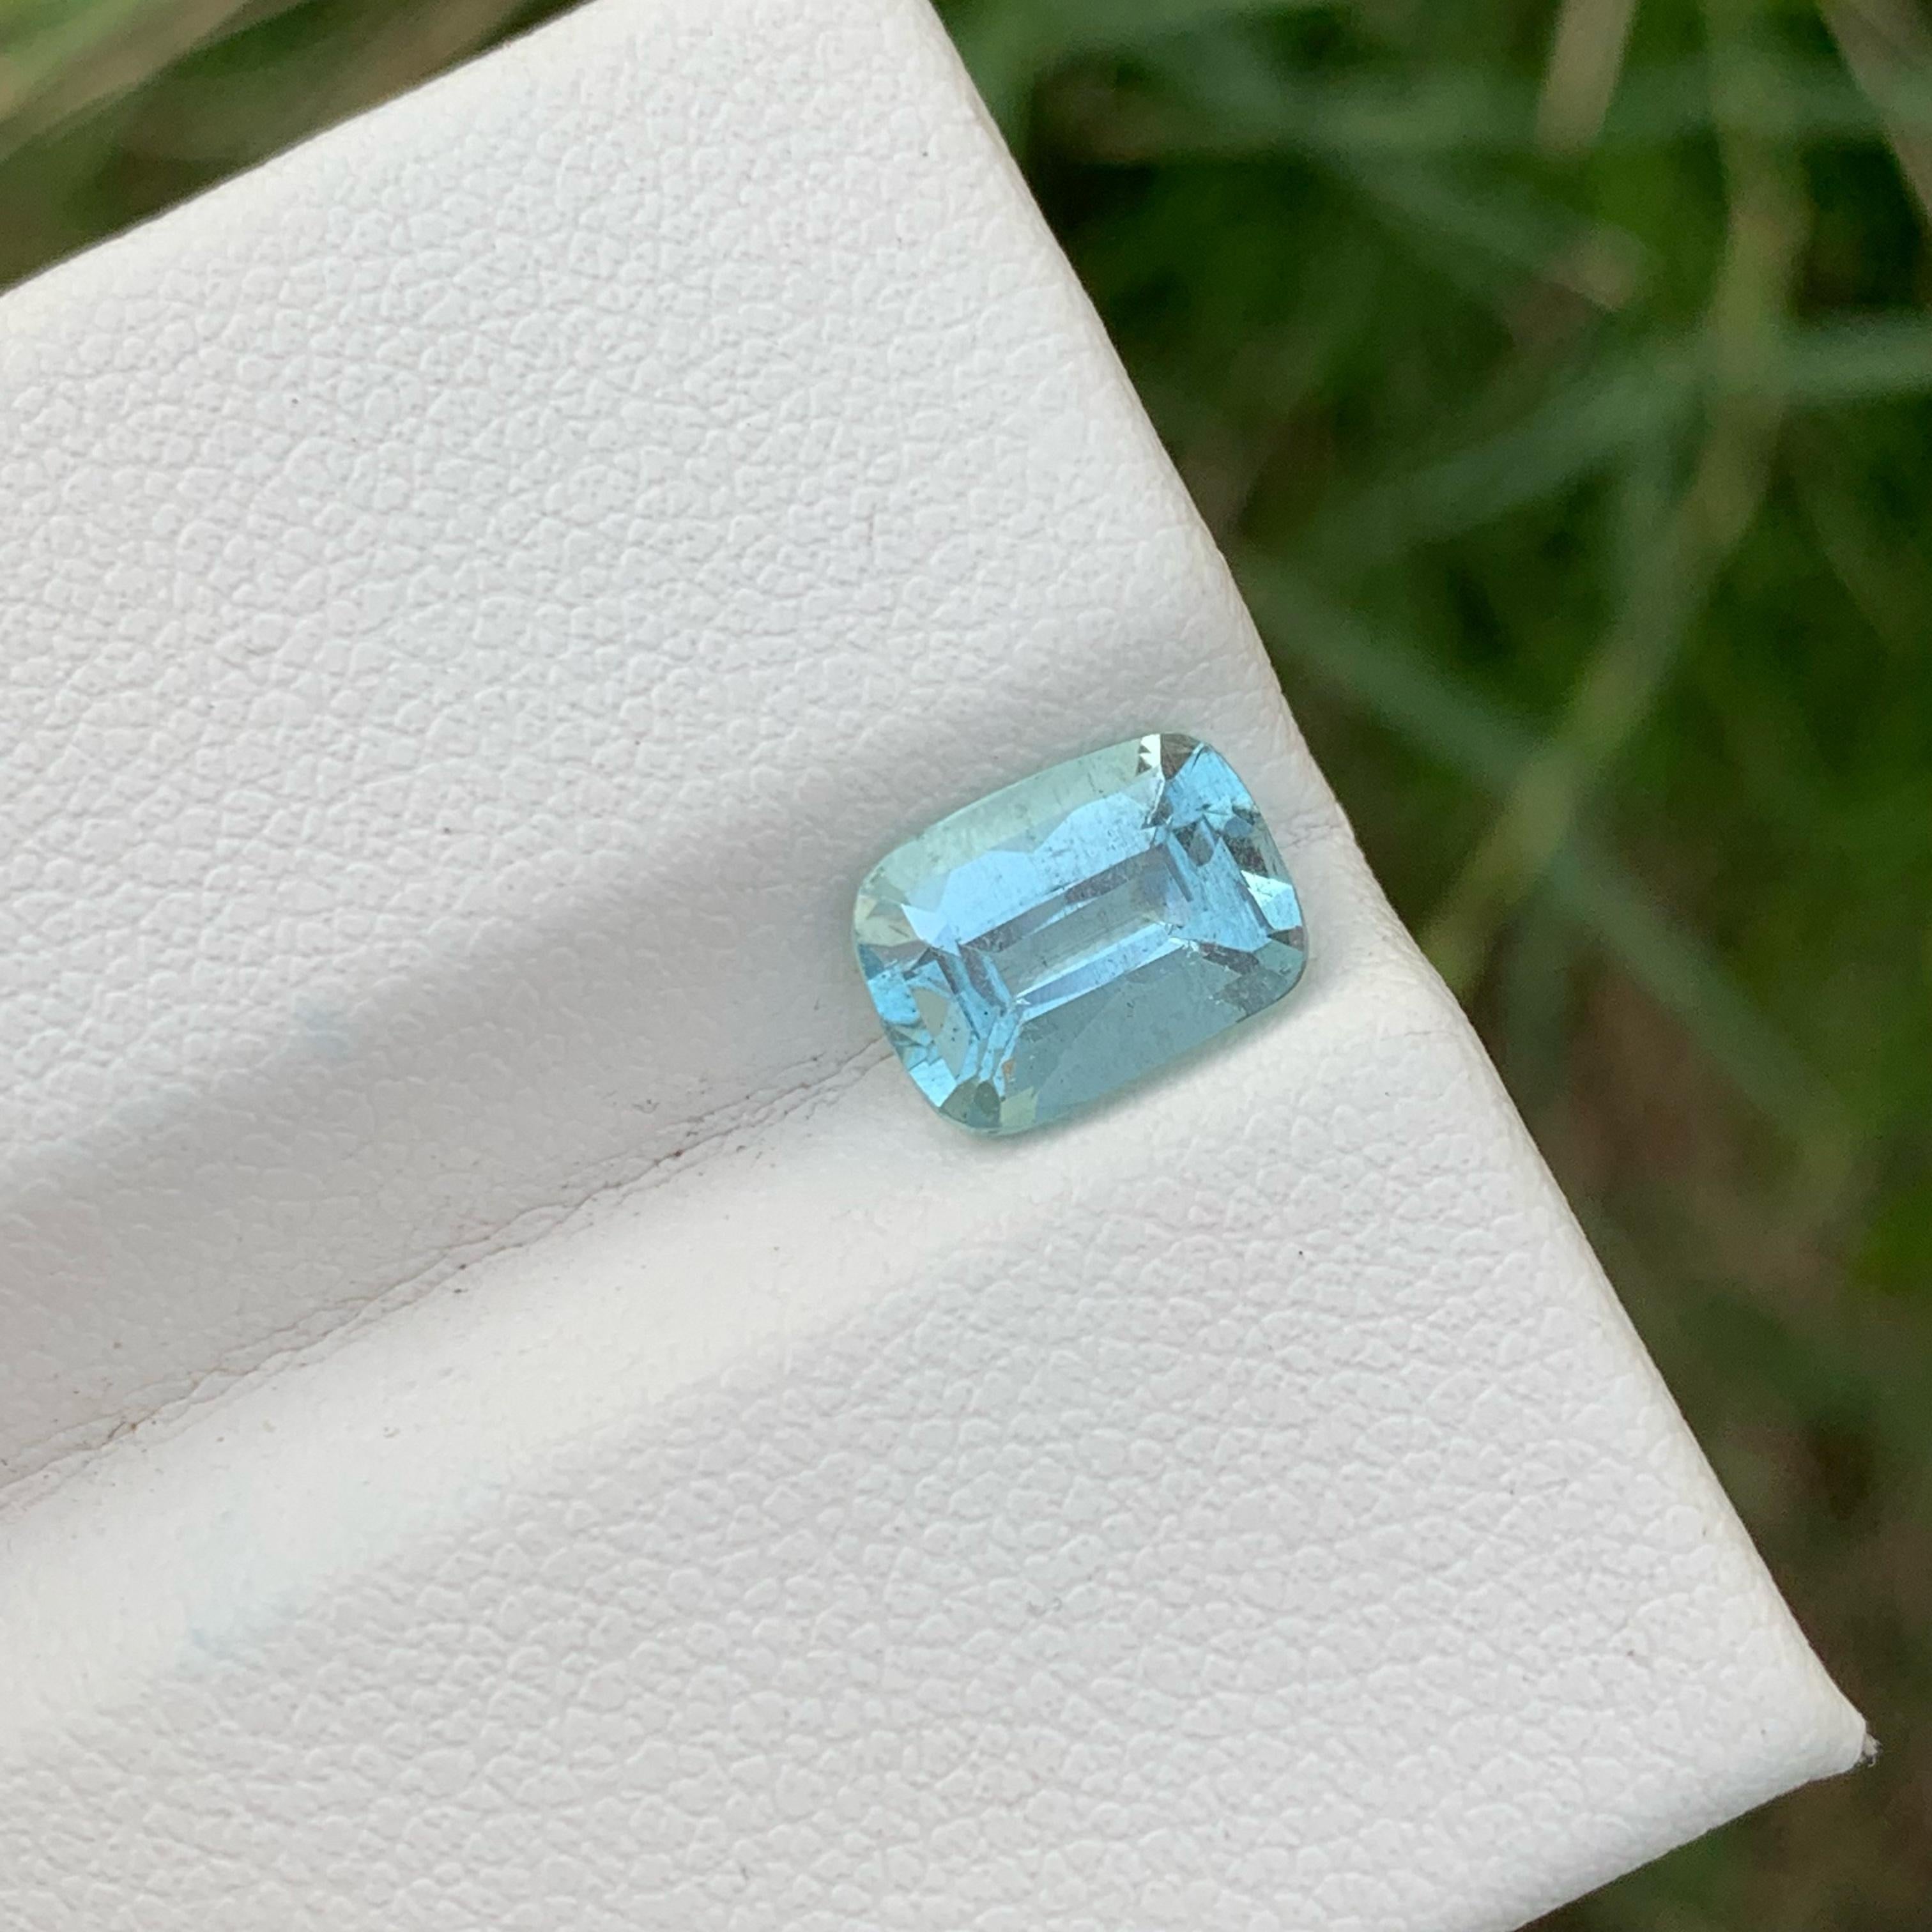 Weight 1.50 carats 
Dimensions 8.5 x 6.3 x 4.3 mm
Treatment None 
Origin Pakistan 
Clarity VVS (Very, Very Slightly Included)
Shape Cushion 
Cut Fancy Cushion



Discover the captivating allure of a genuine 1.50-carat blue aquamarine gemstone,